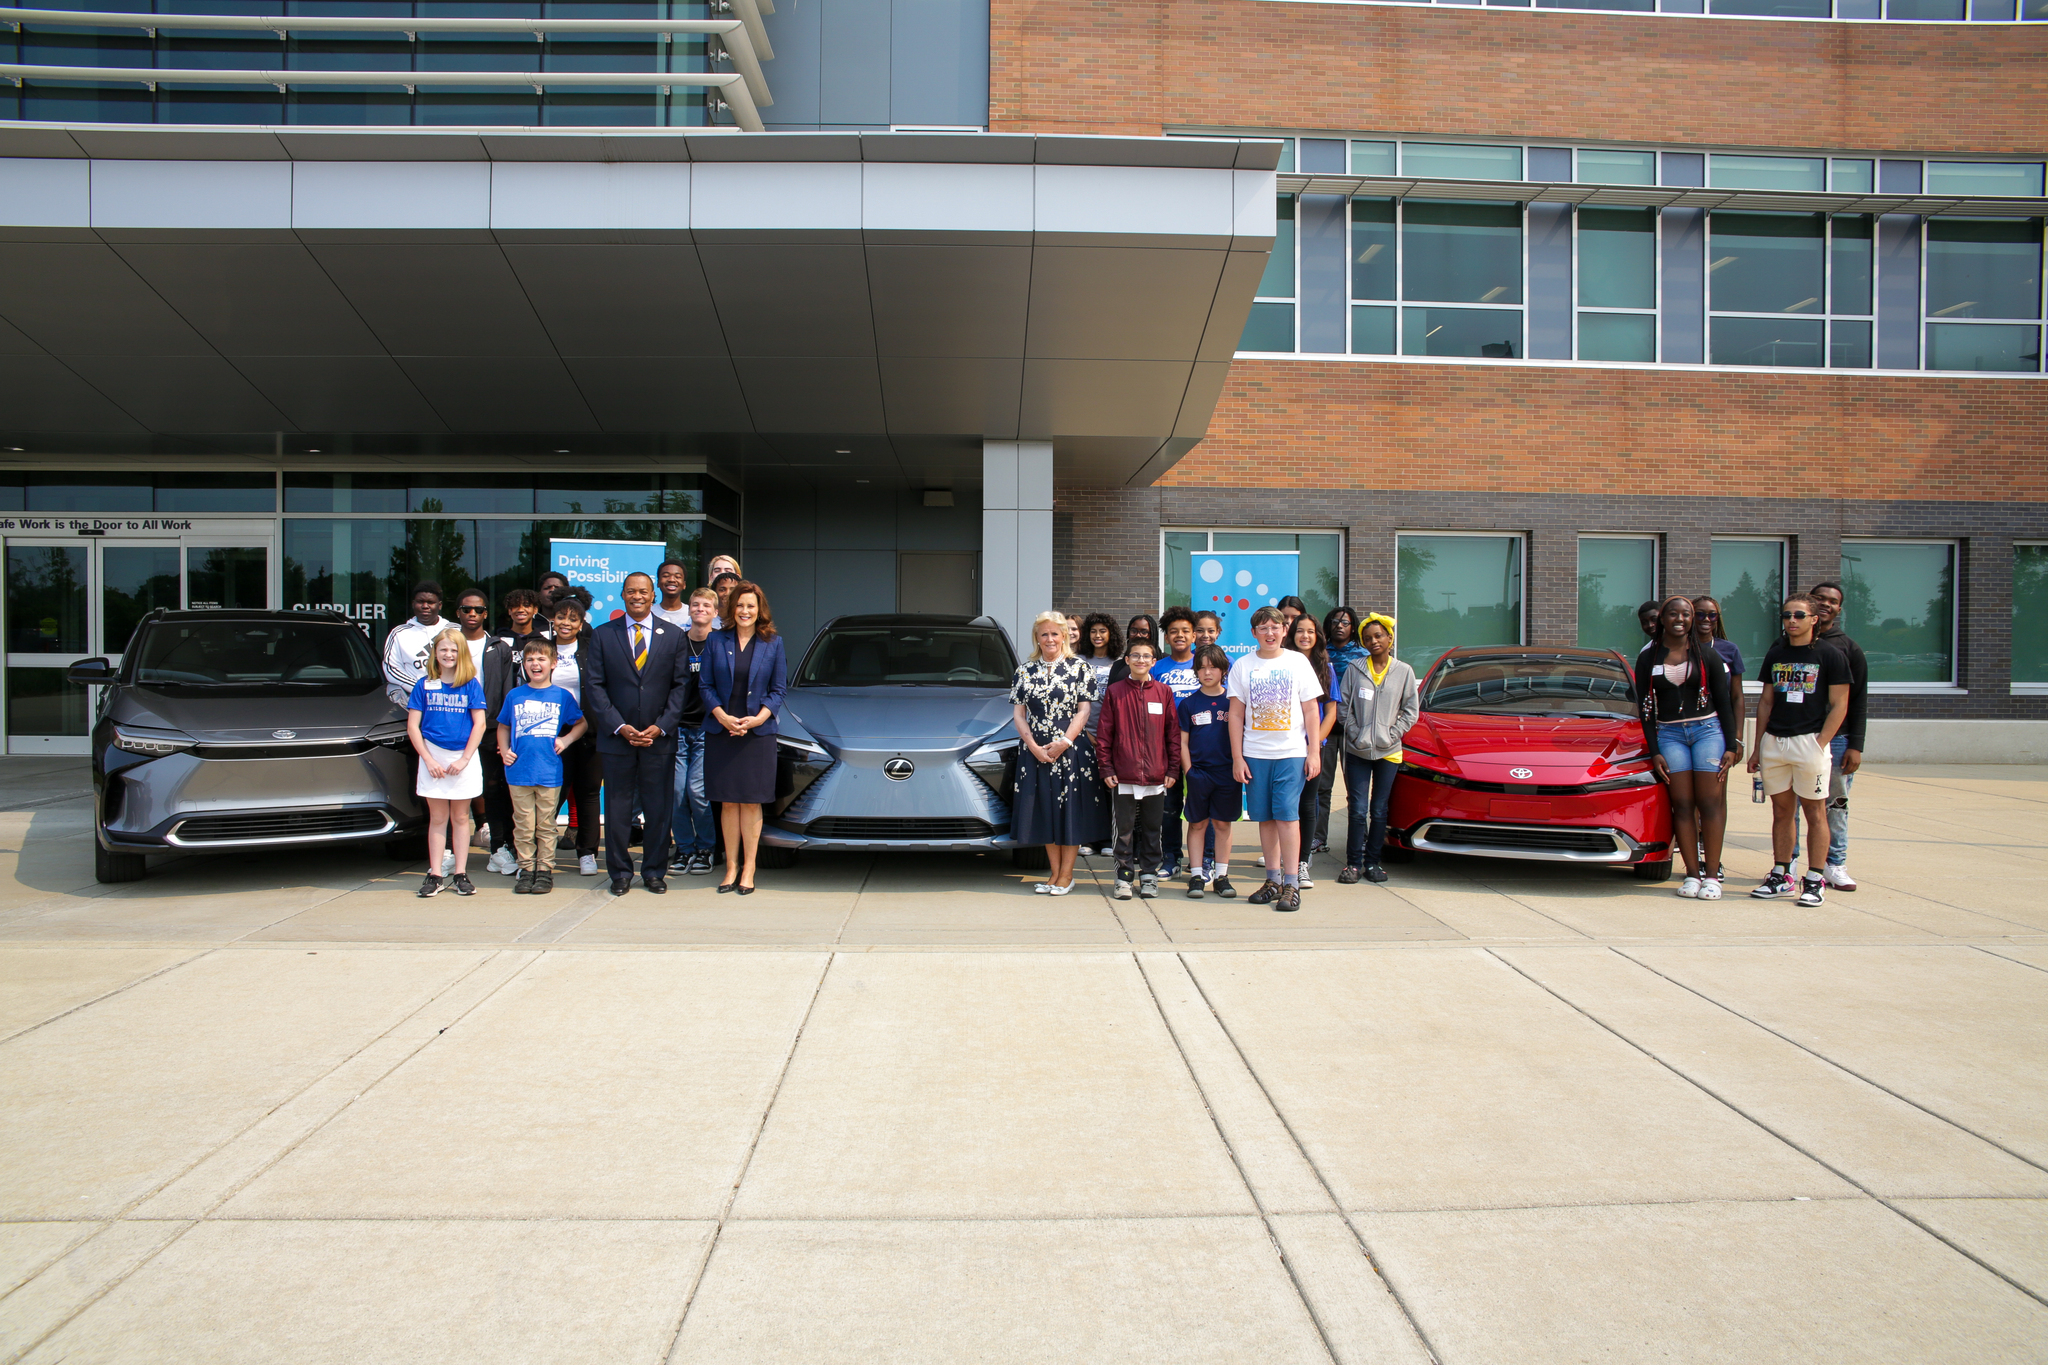 Students stand next to electric vehicles.